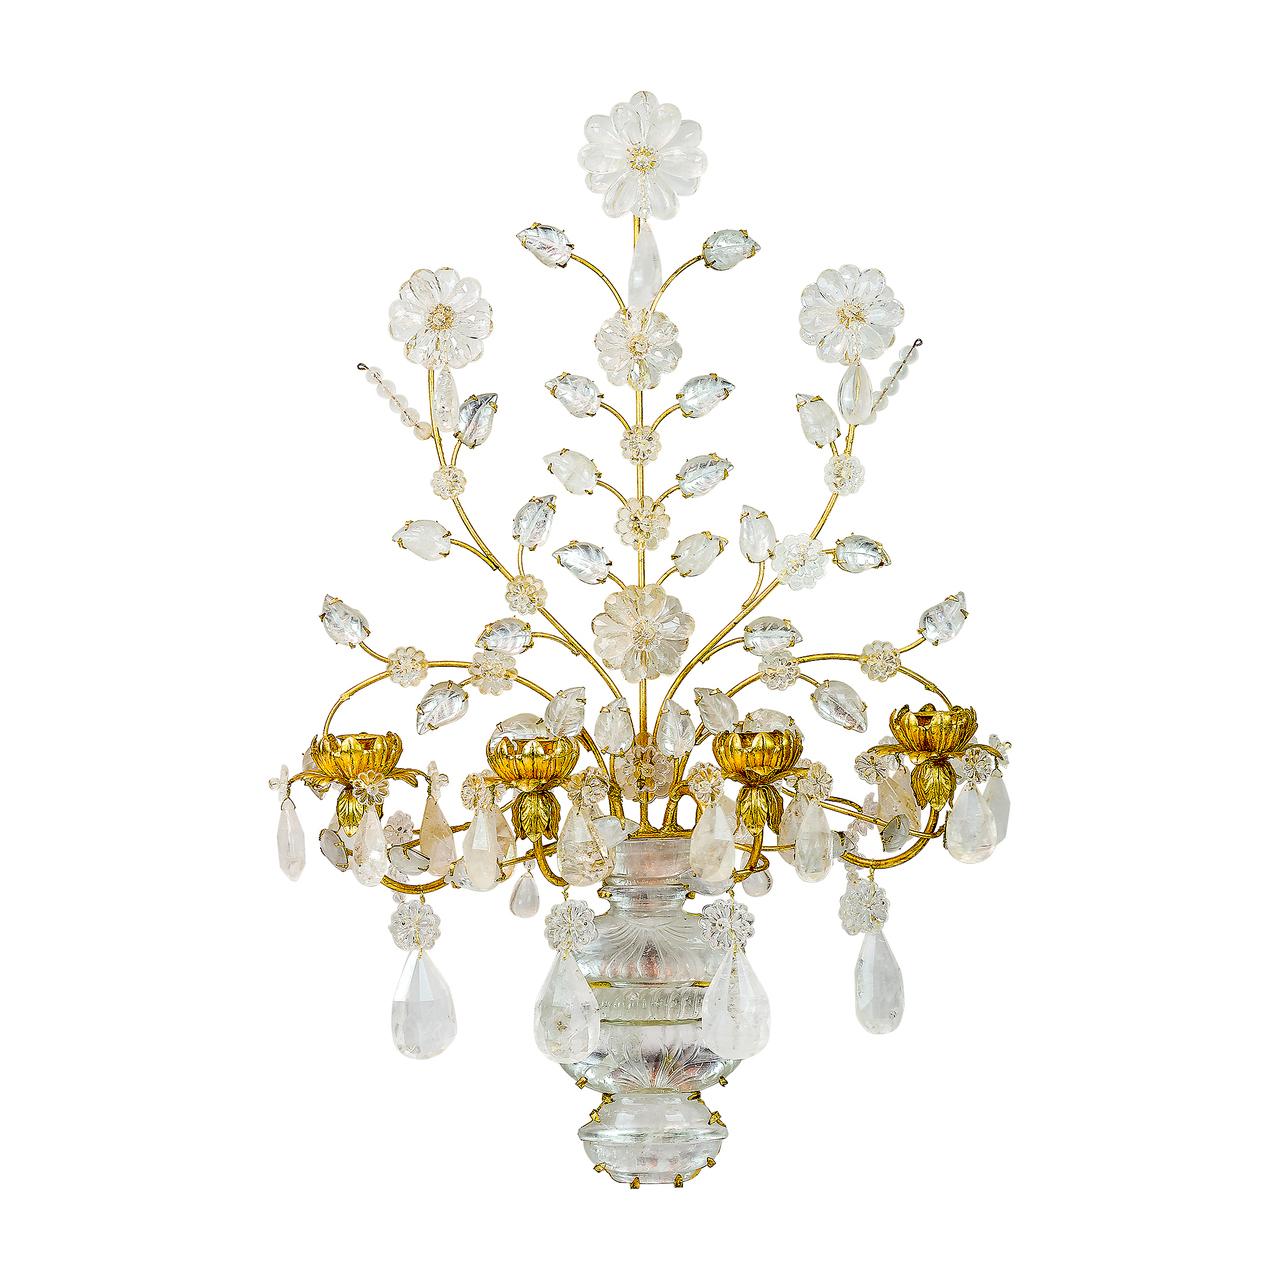 An exquisite pair of neoclassical four-light gilt bronze foliage, carved in rock crystal wall sconces attributed to Baguès.

Maker: Baguès Paris
Origin: French
Date: Early 20th century
Dimension: 30 in. x 20 in. x 9 in.